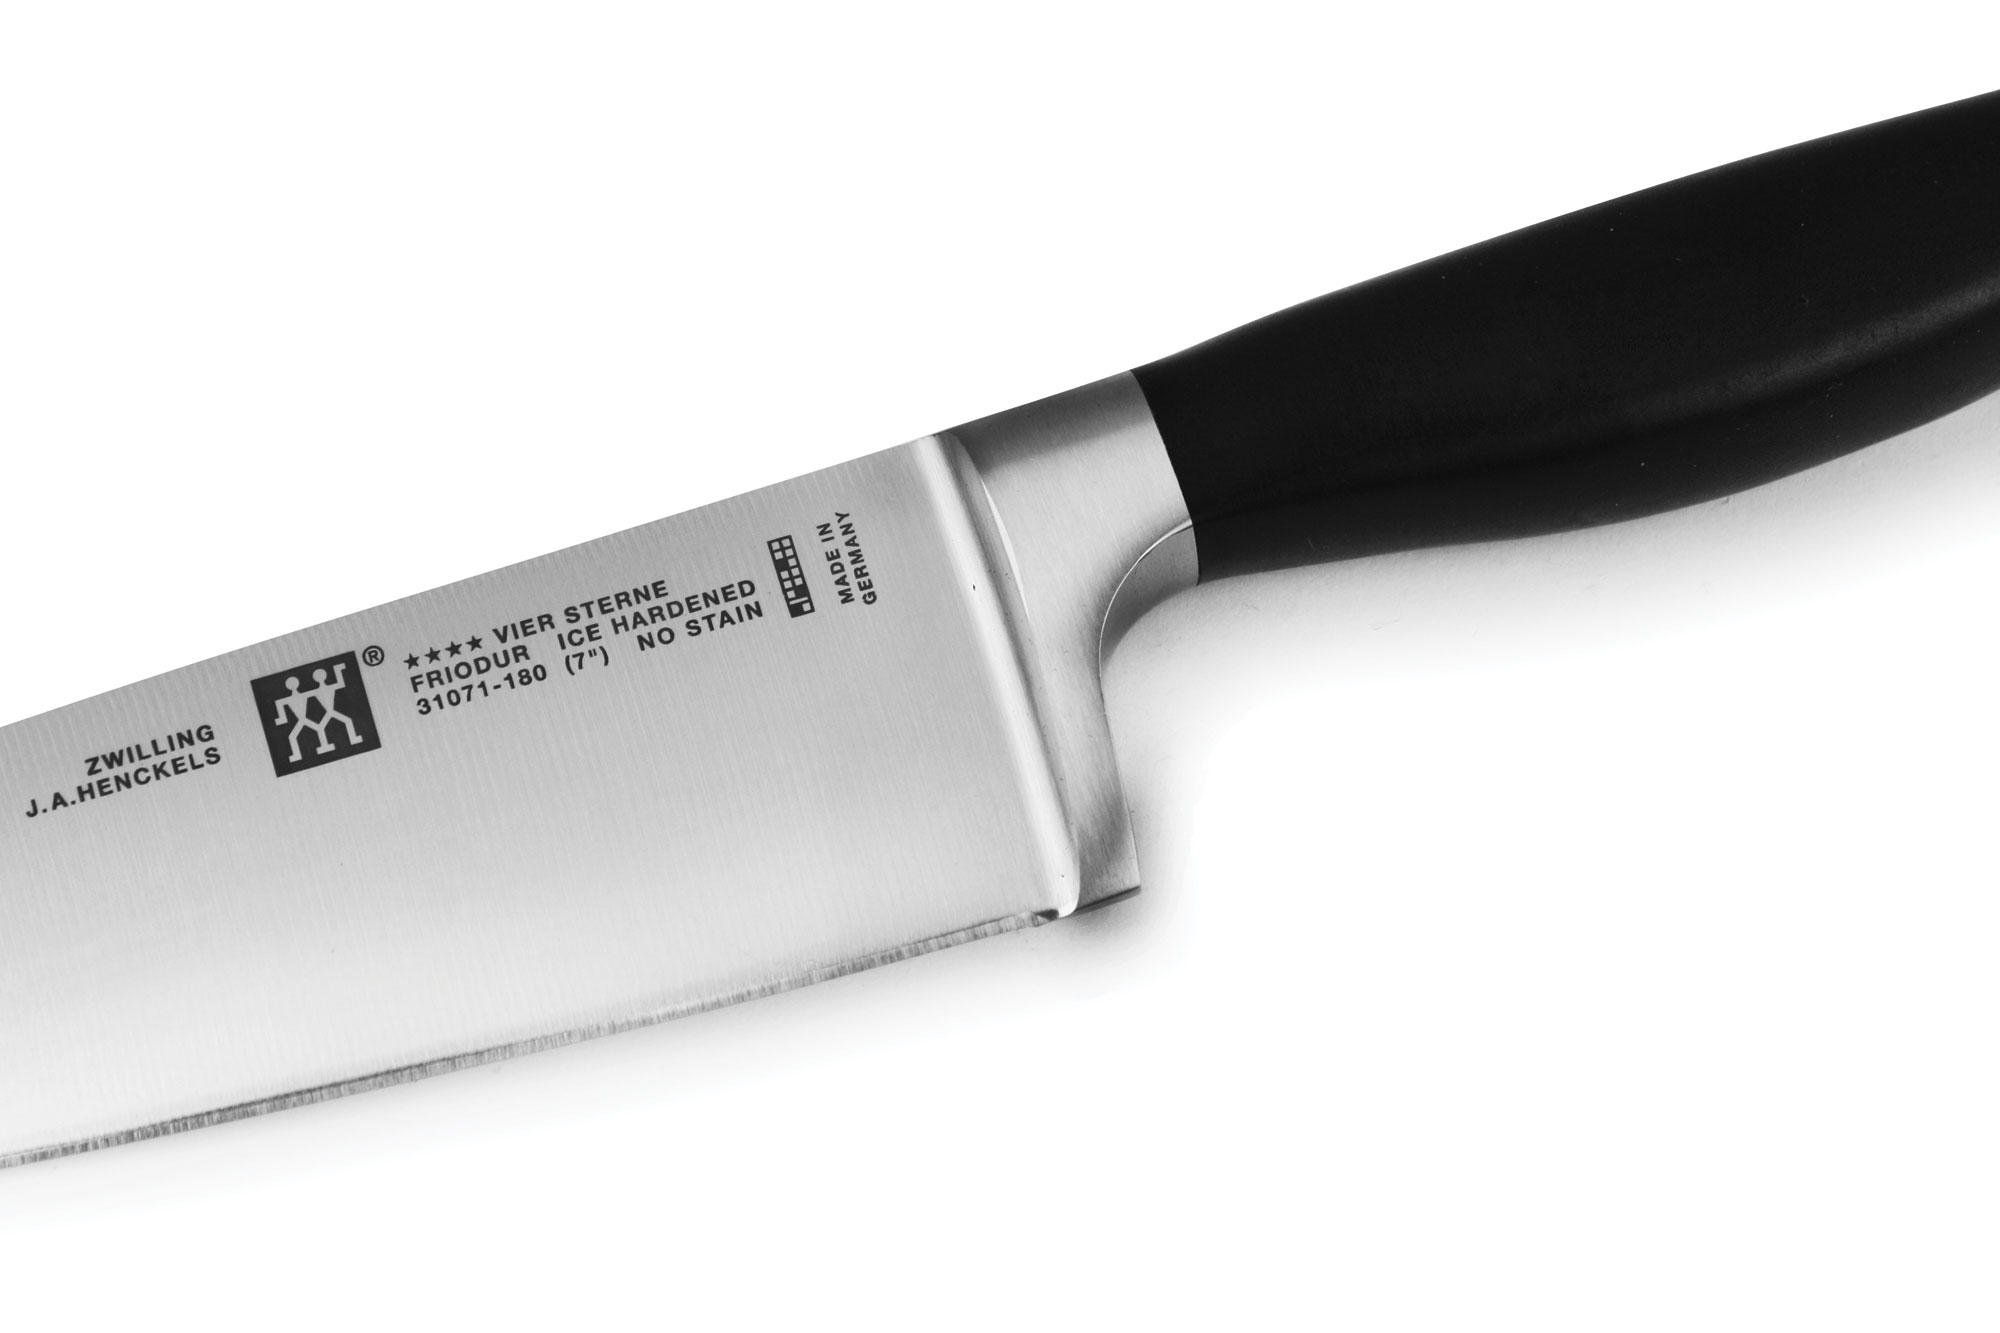 Zwilling J.A. Henckels Four Star Chef's Knife, 7-inch | Cutlery and More